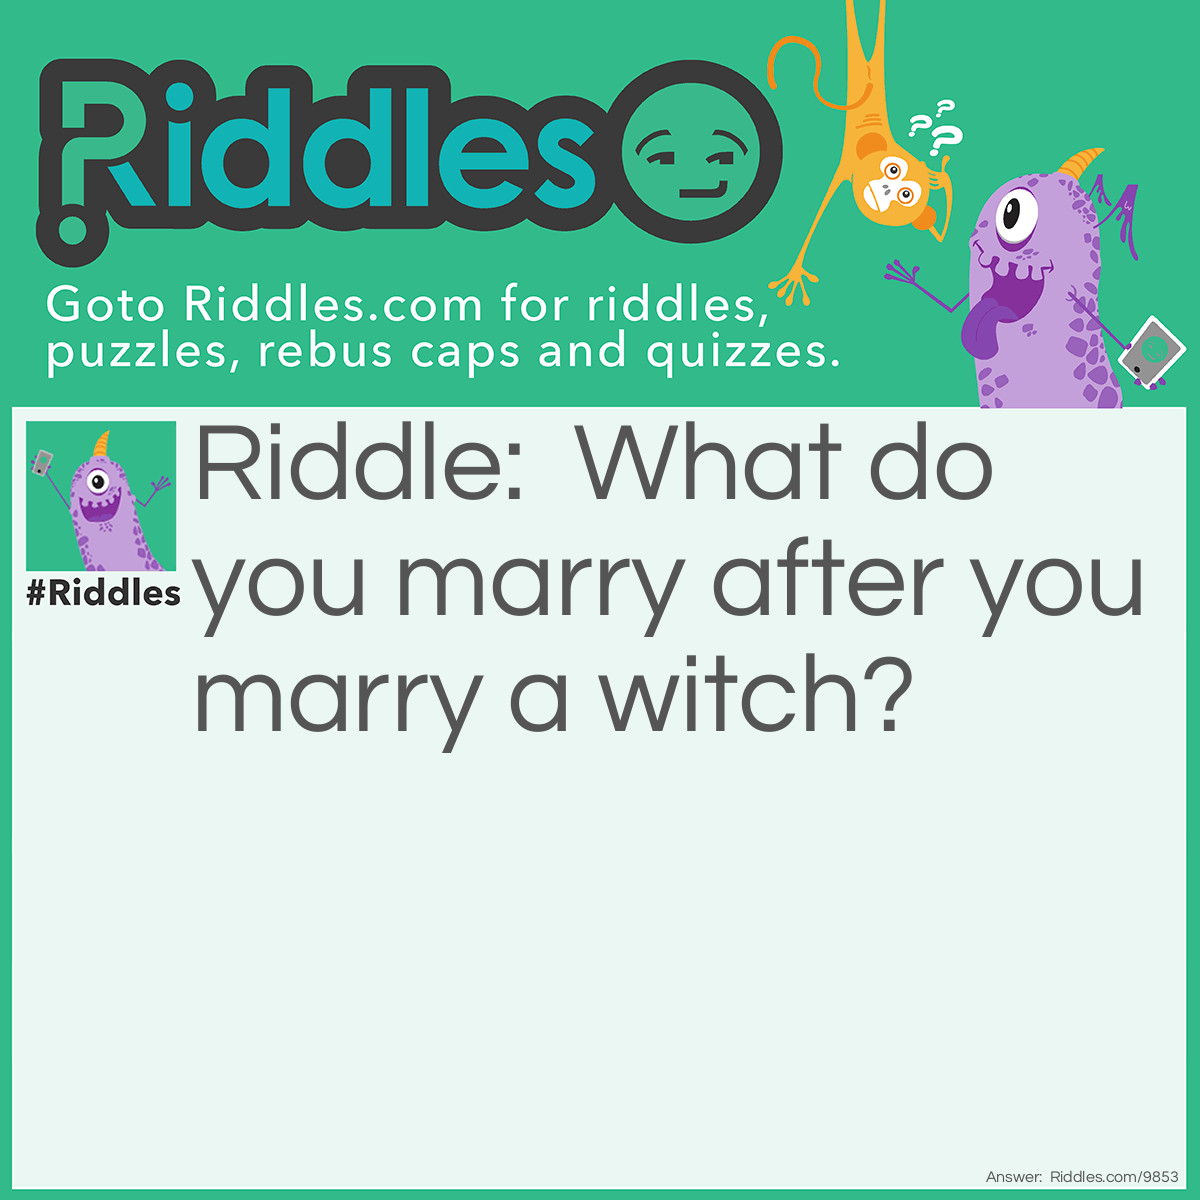 Riddle: What do you marry after you marry a witch? Answer: Death; because the witch will kill you.